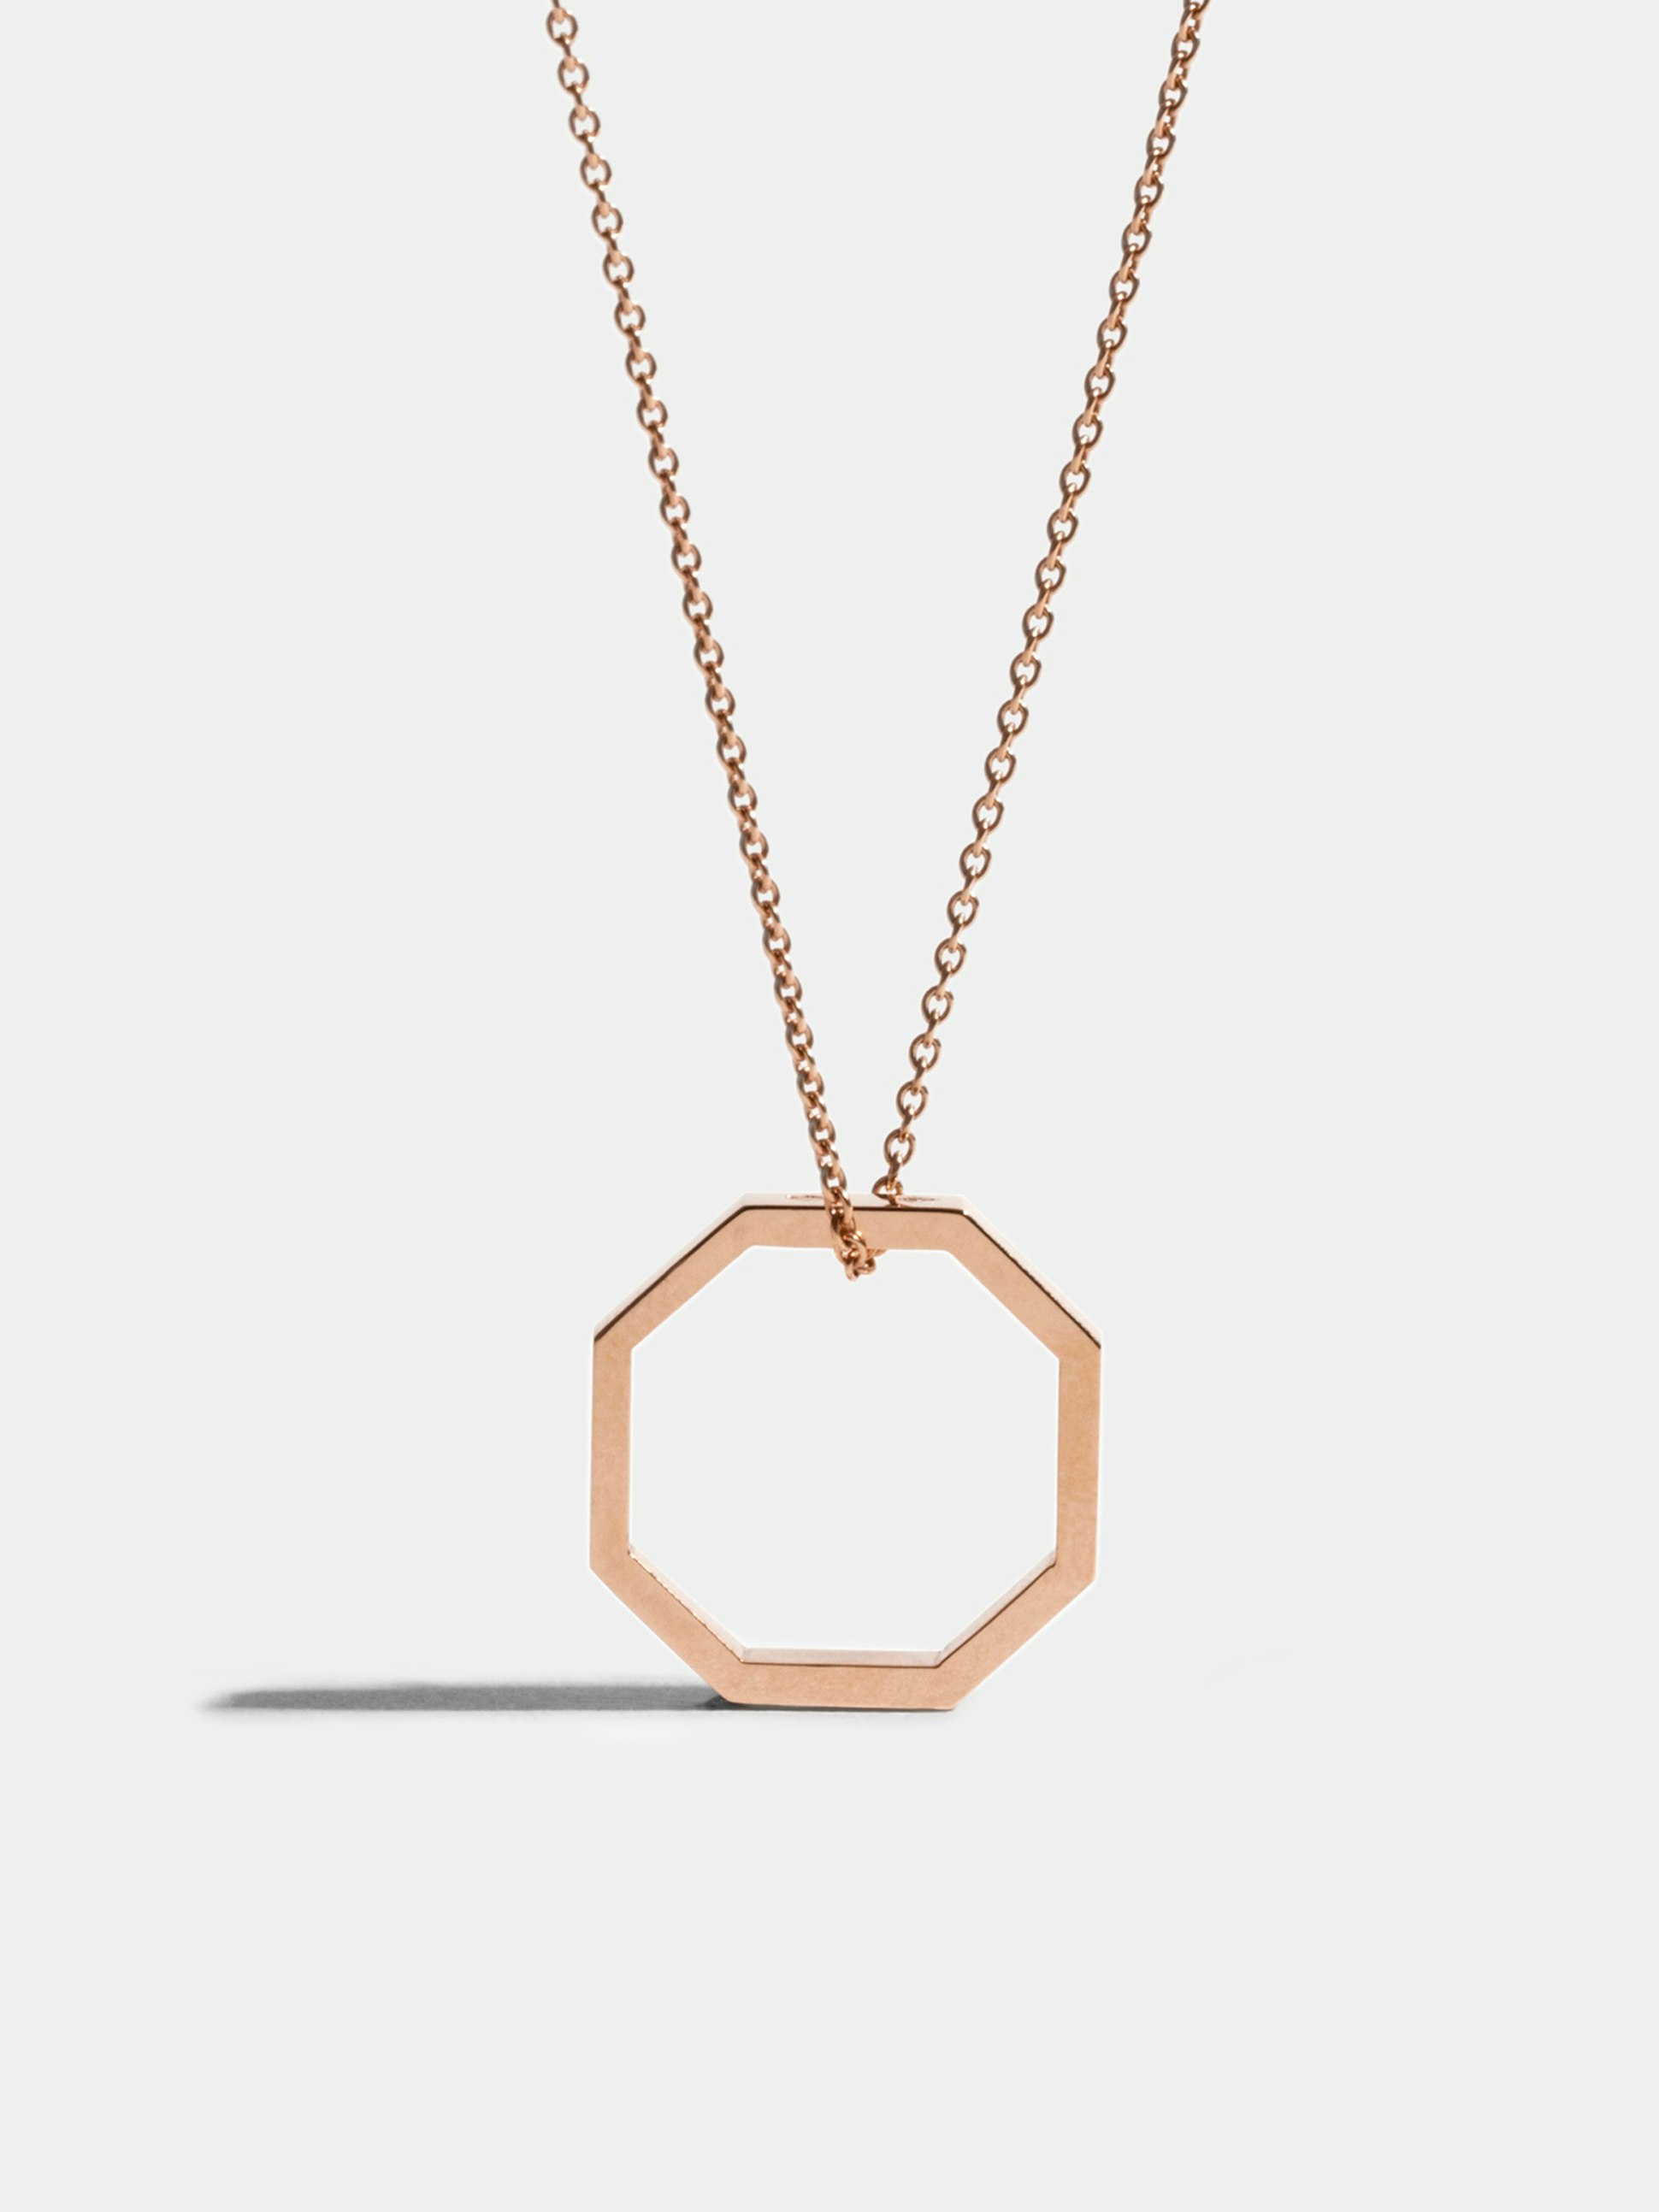 Octogone necklace with a 18mm pendant in 18k Fairmined ethical rose gold, on a 88cm chain.